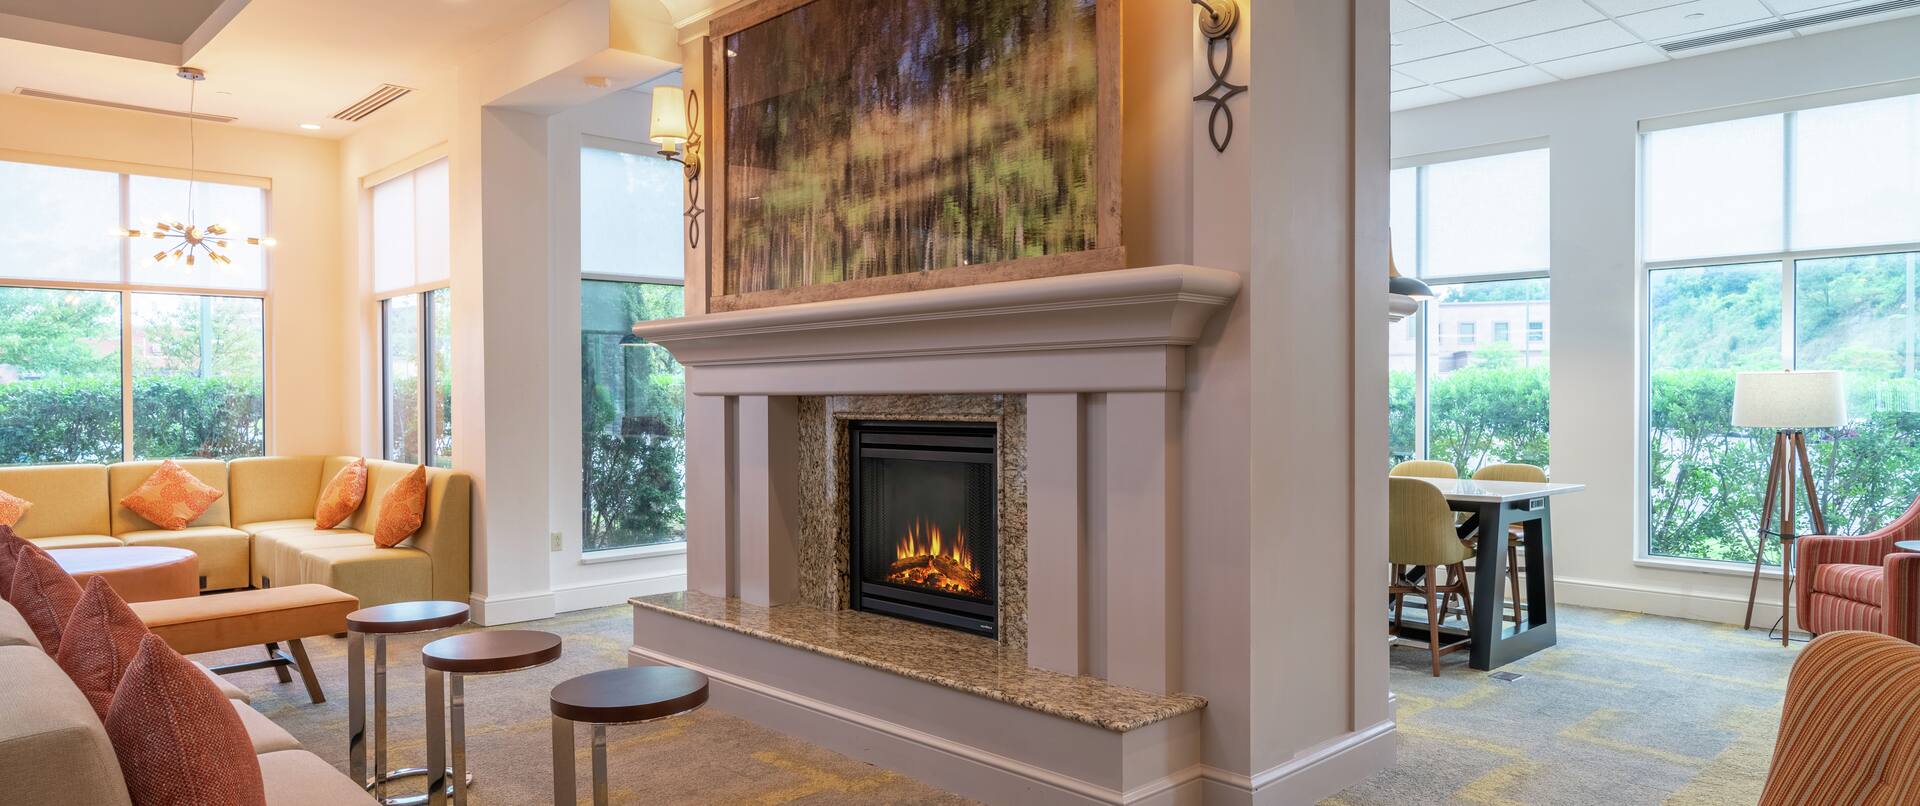 The Lobby Fireplace